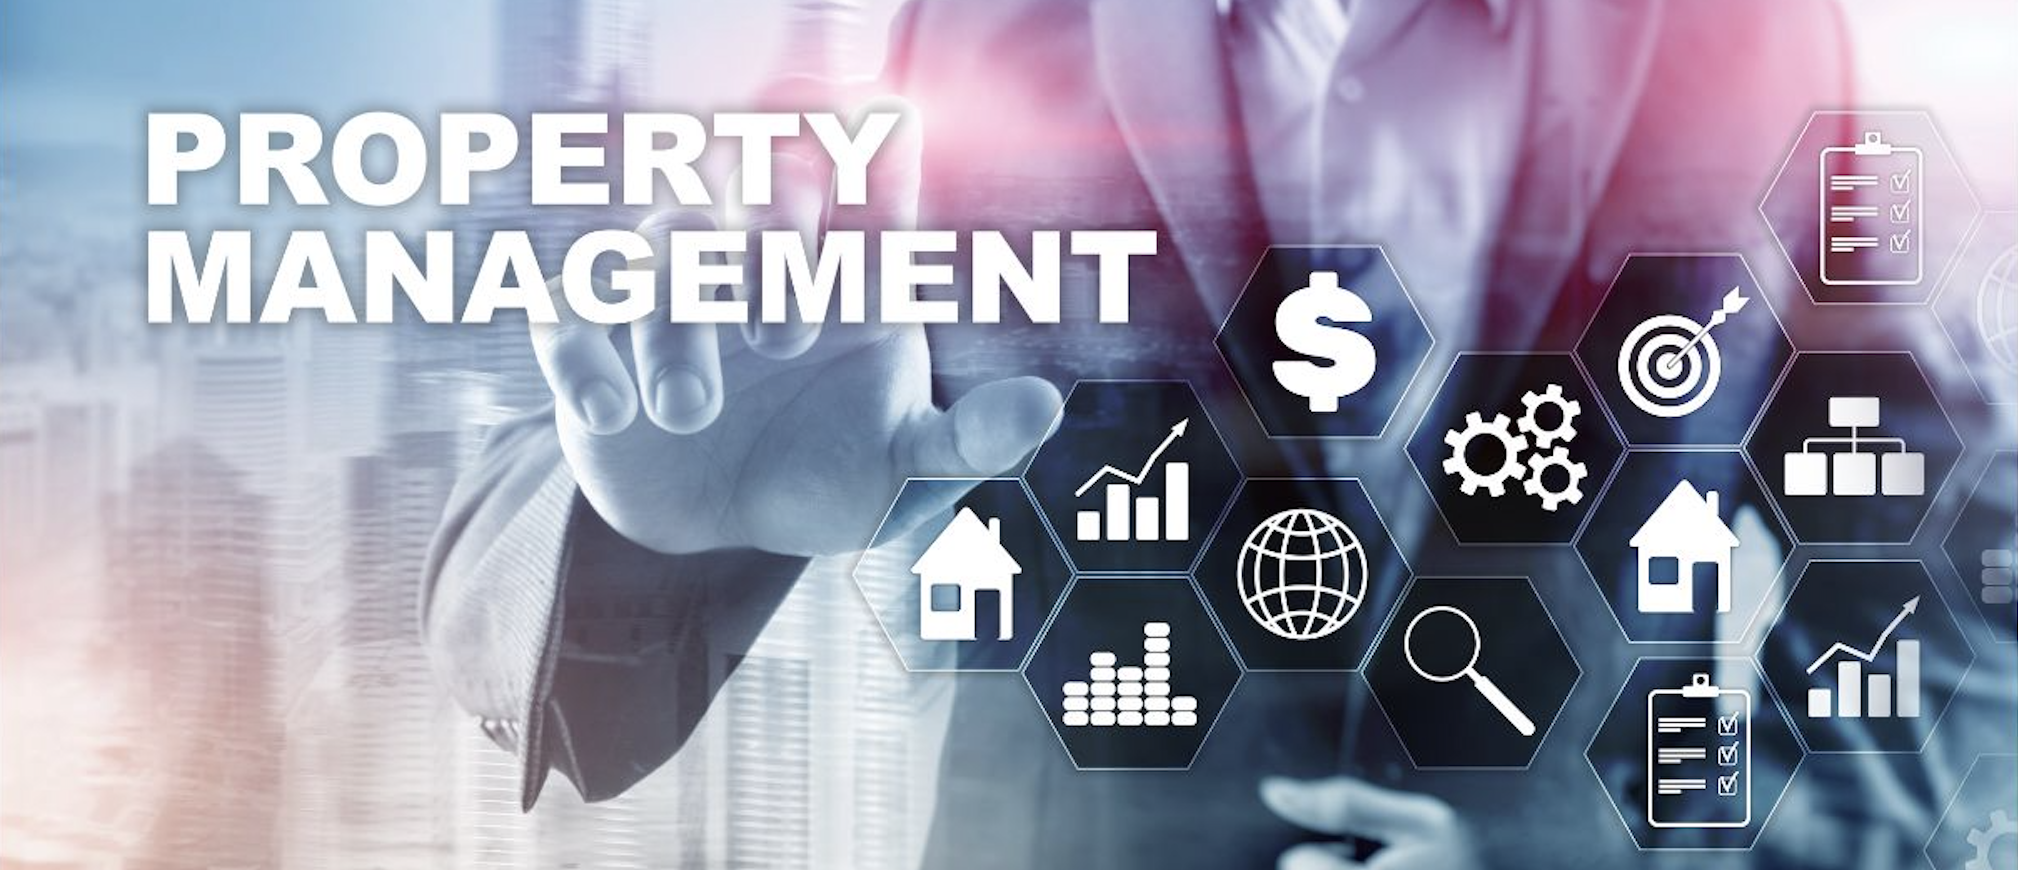 Image illustrating property management with a variety of icons representing different aspects such as maintenance, finance, communication, and more.